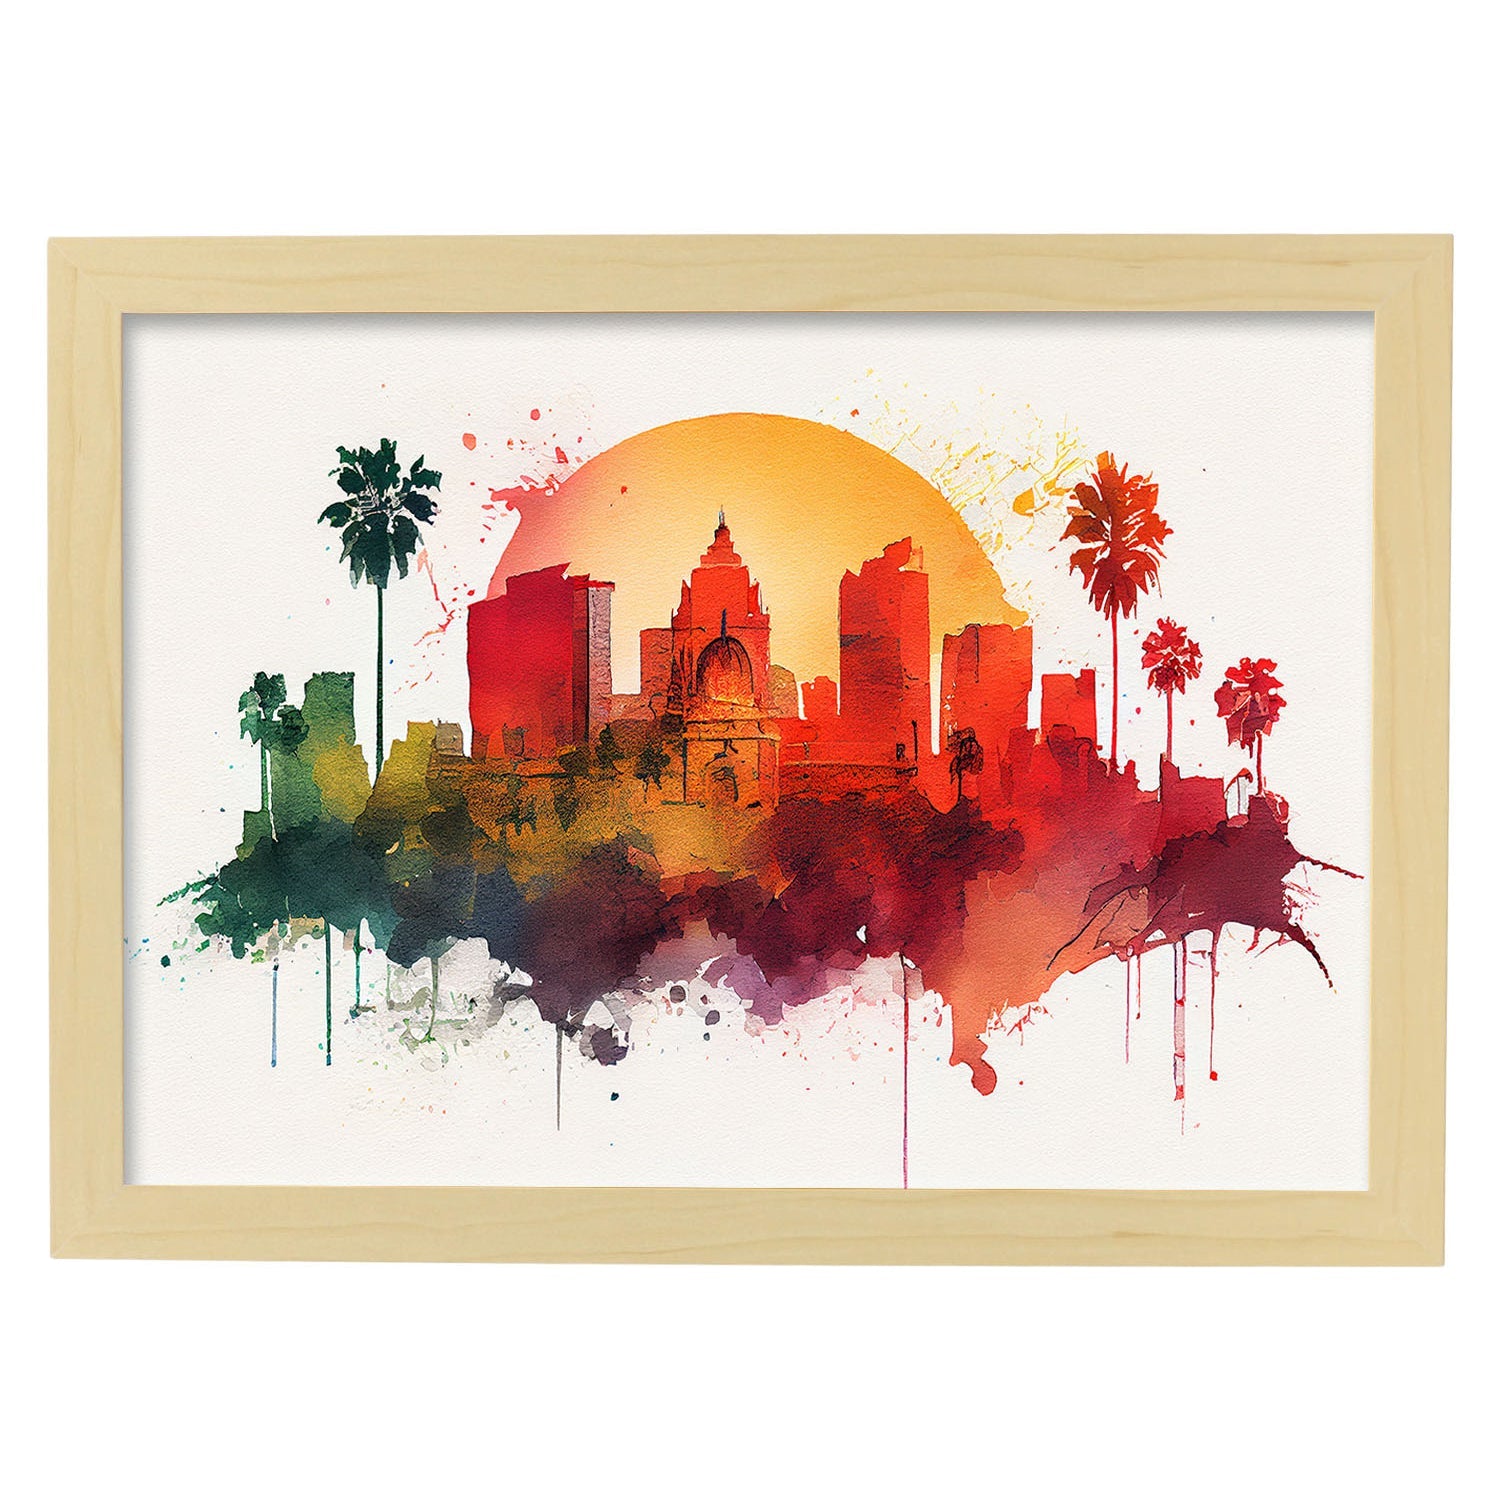 Nacnic watercolor of a skyline of the city of Los Angeles_1. Aesthetic Wall Art Prints for Bedroom or Living Room Design.-Artwork-Nacnic-A4-Marco Madera Clara-Nacnic Estudio SL